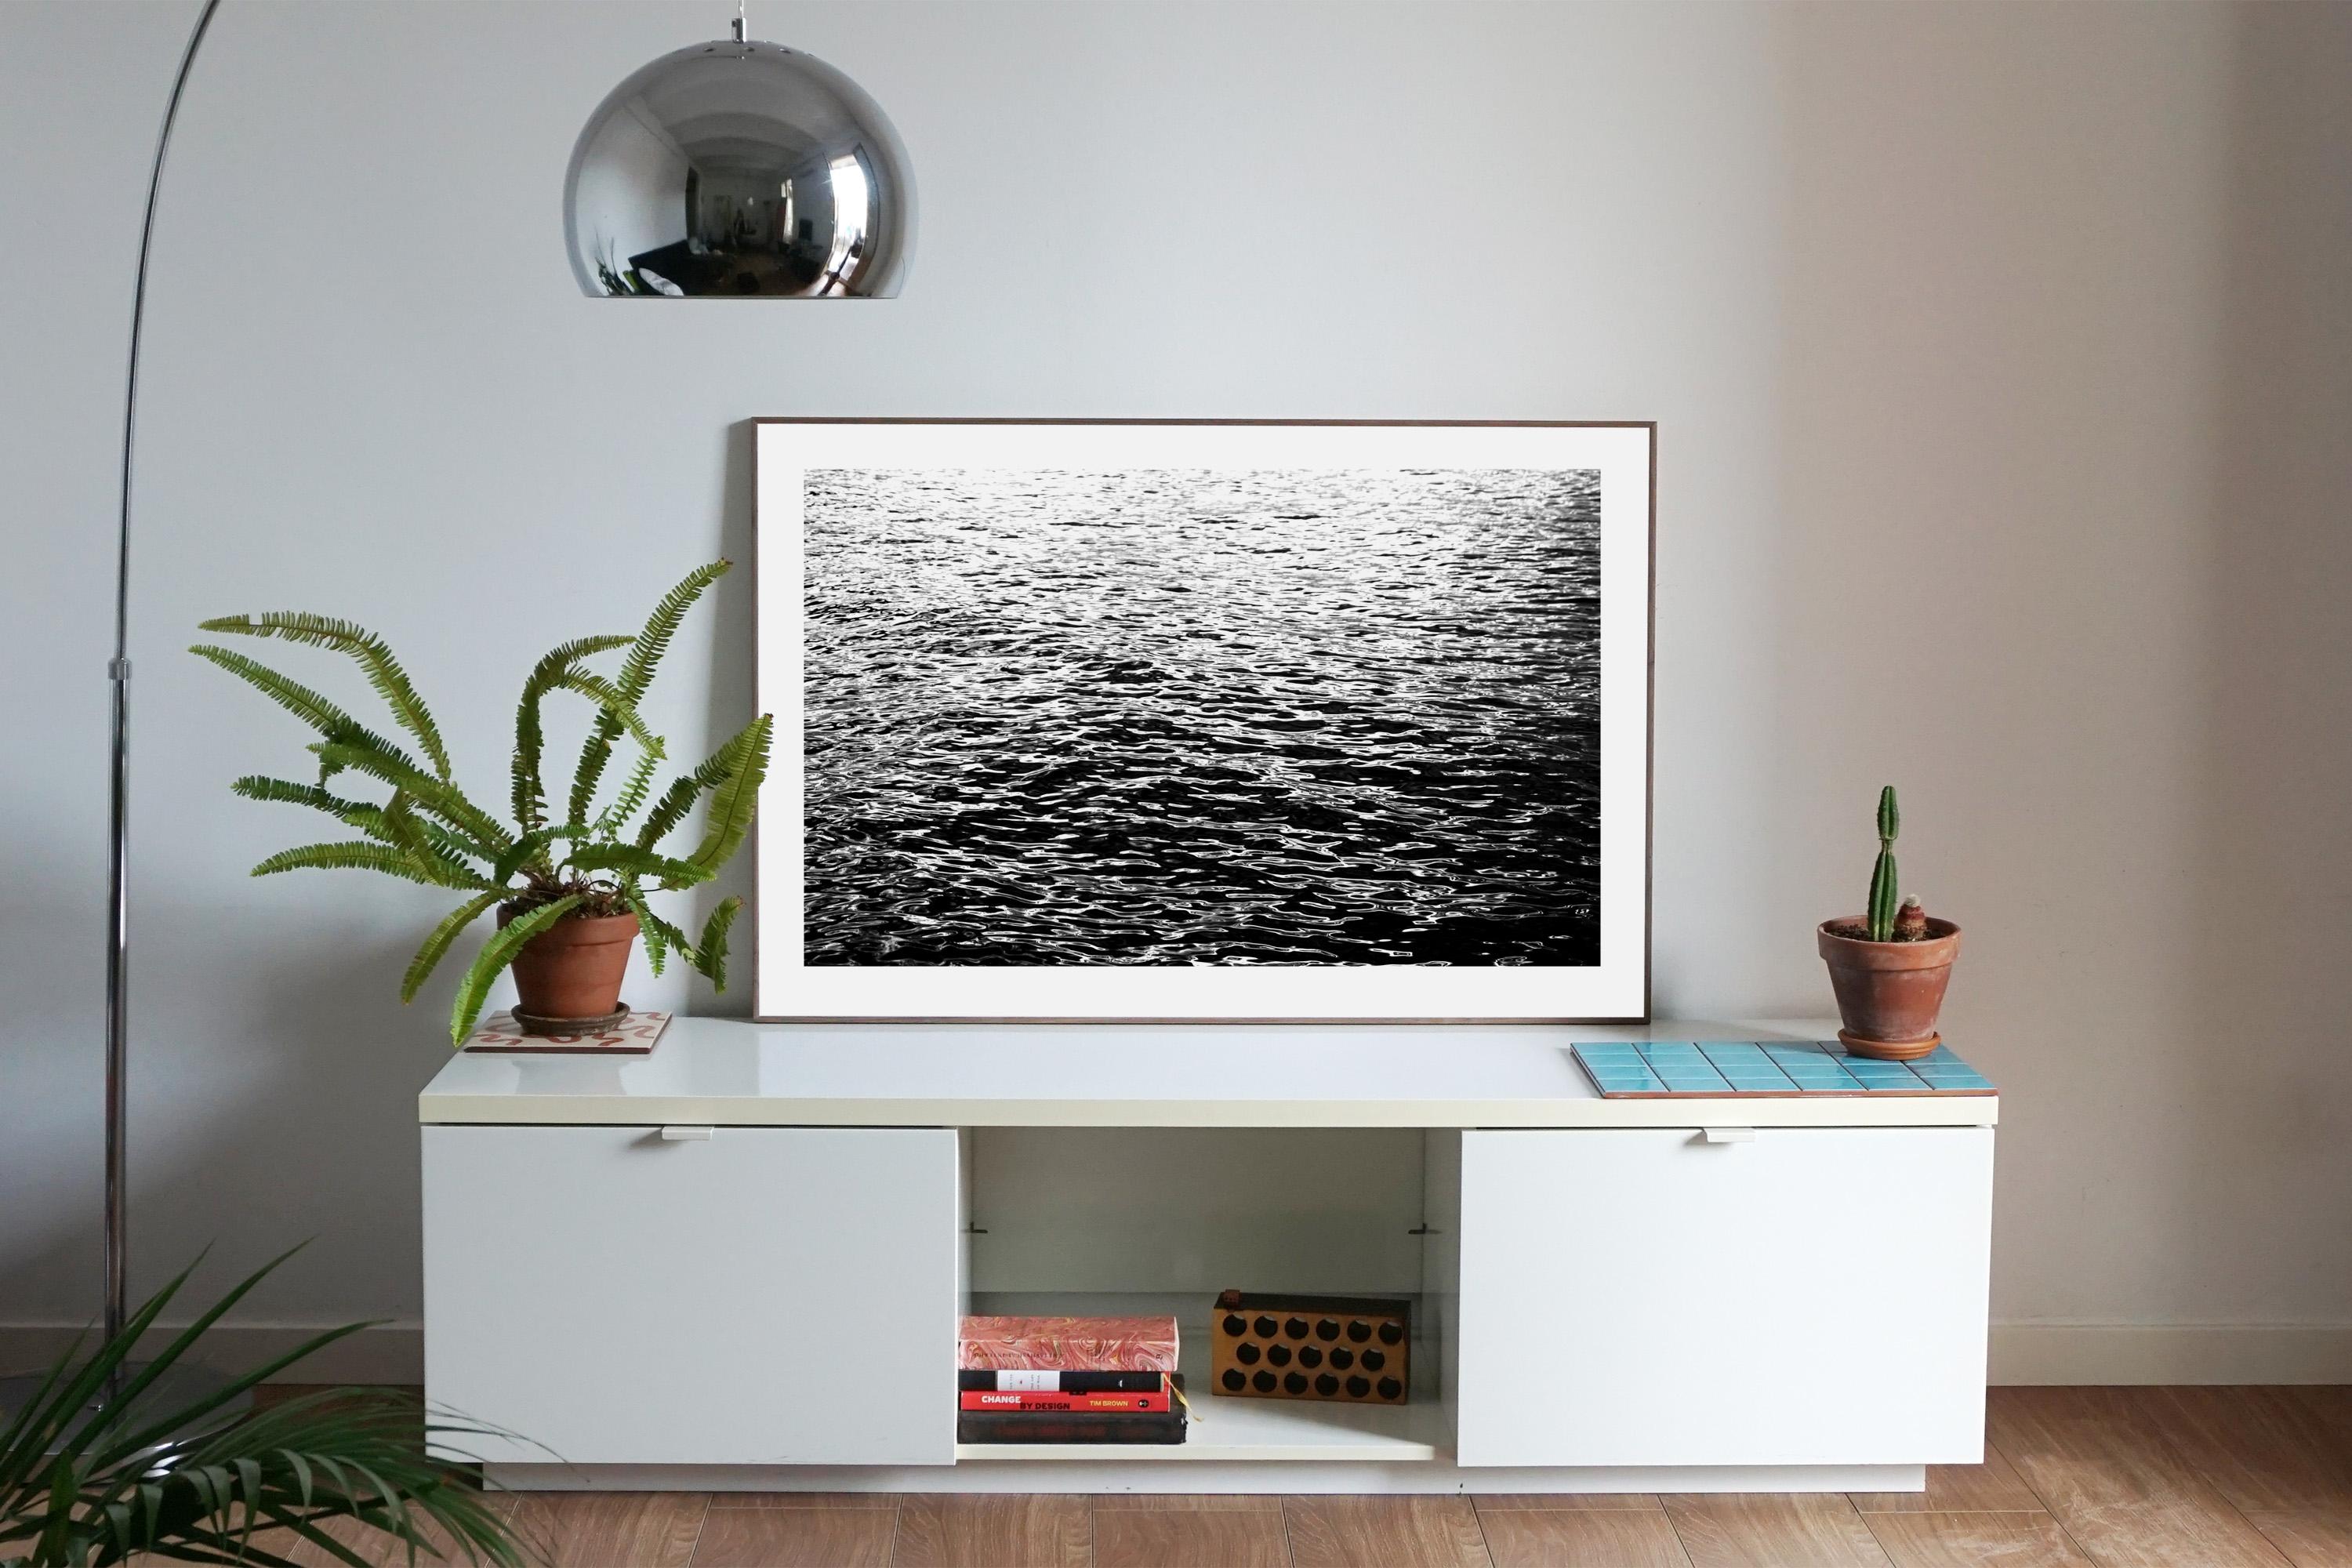 Large Black and White Seascape of Calming Sea Ripples, Abstract Water Reflection - Minimalist Photograph by Kind of Cyan